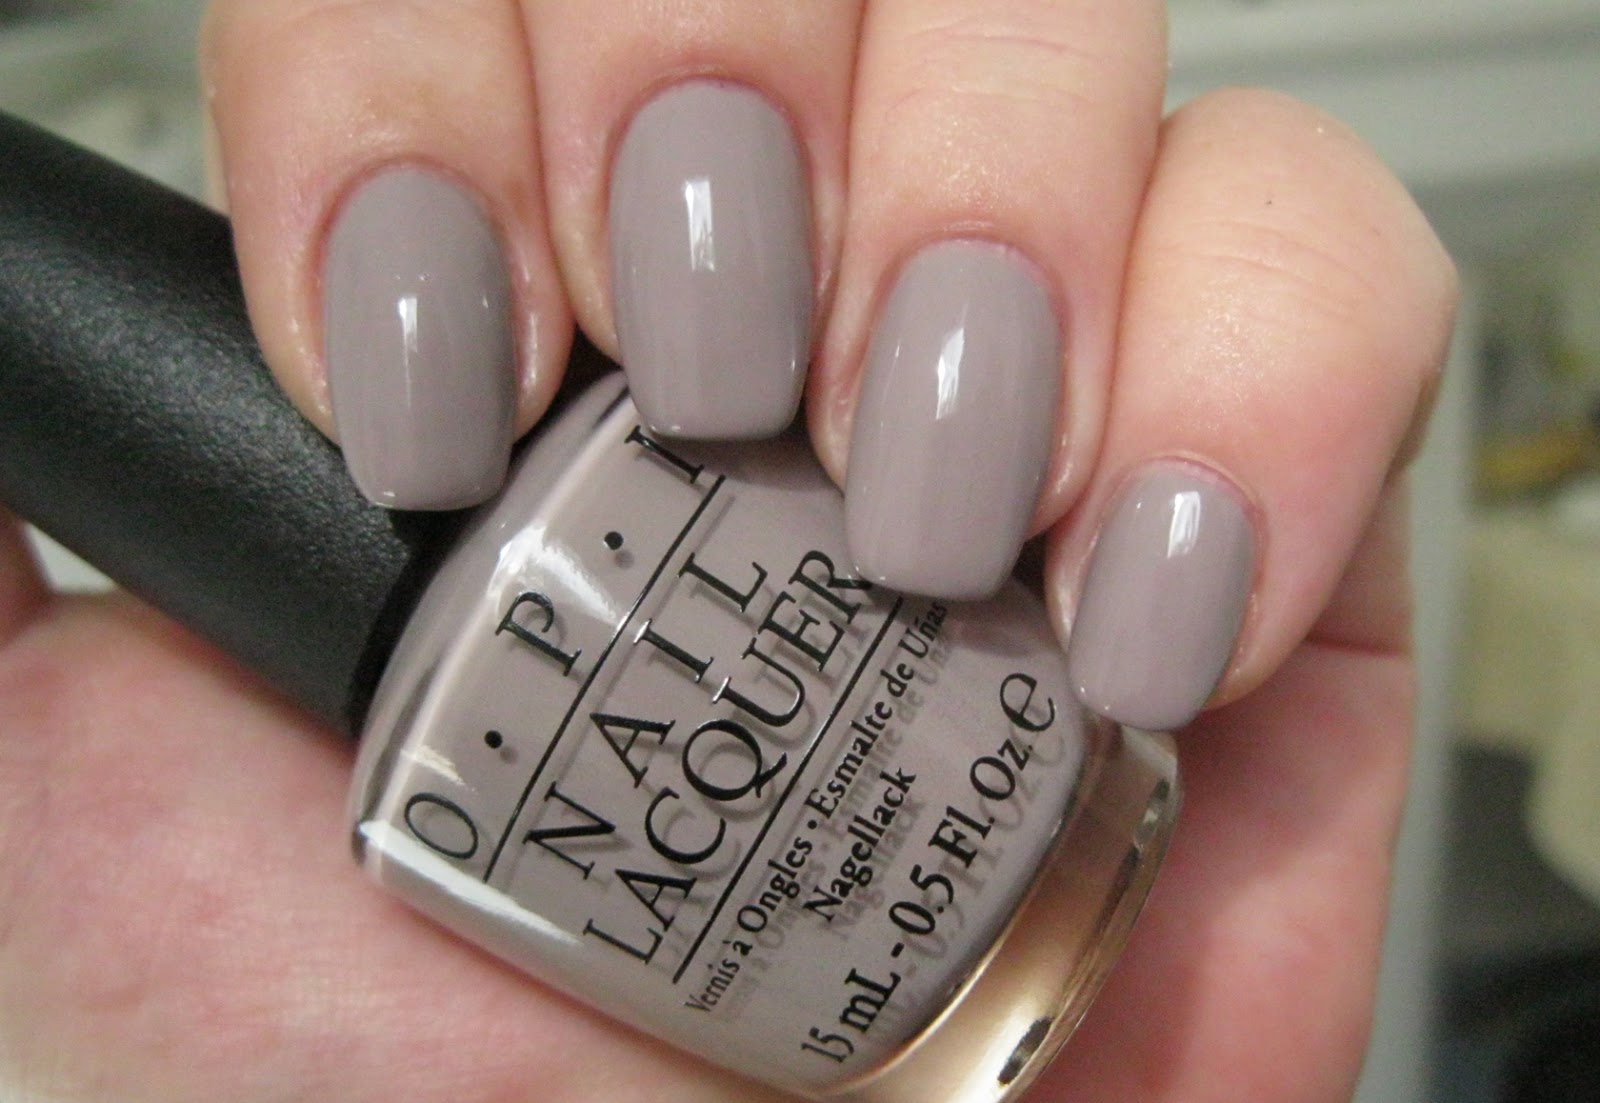 OPI Nail Lacquer in "Taupe-less Beach" - wide 8